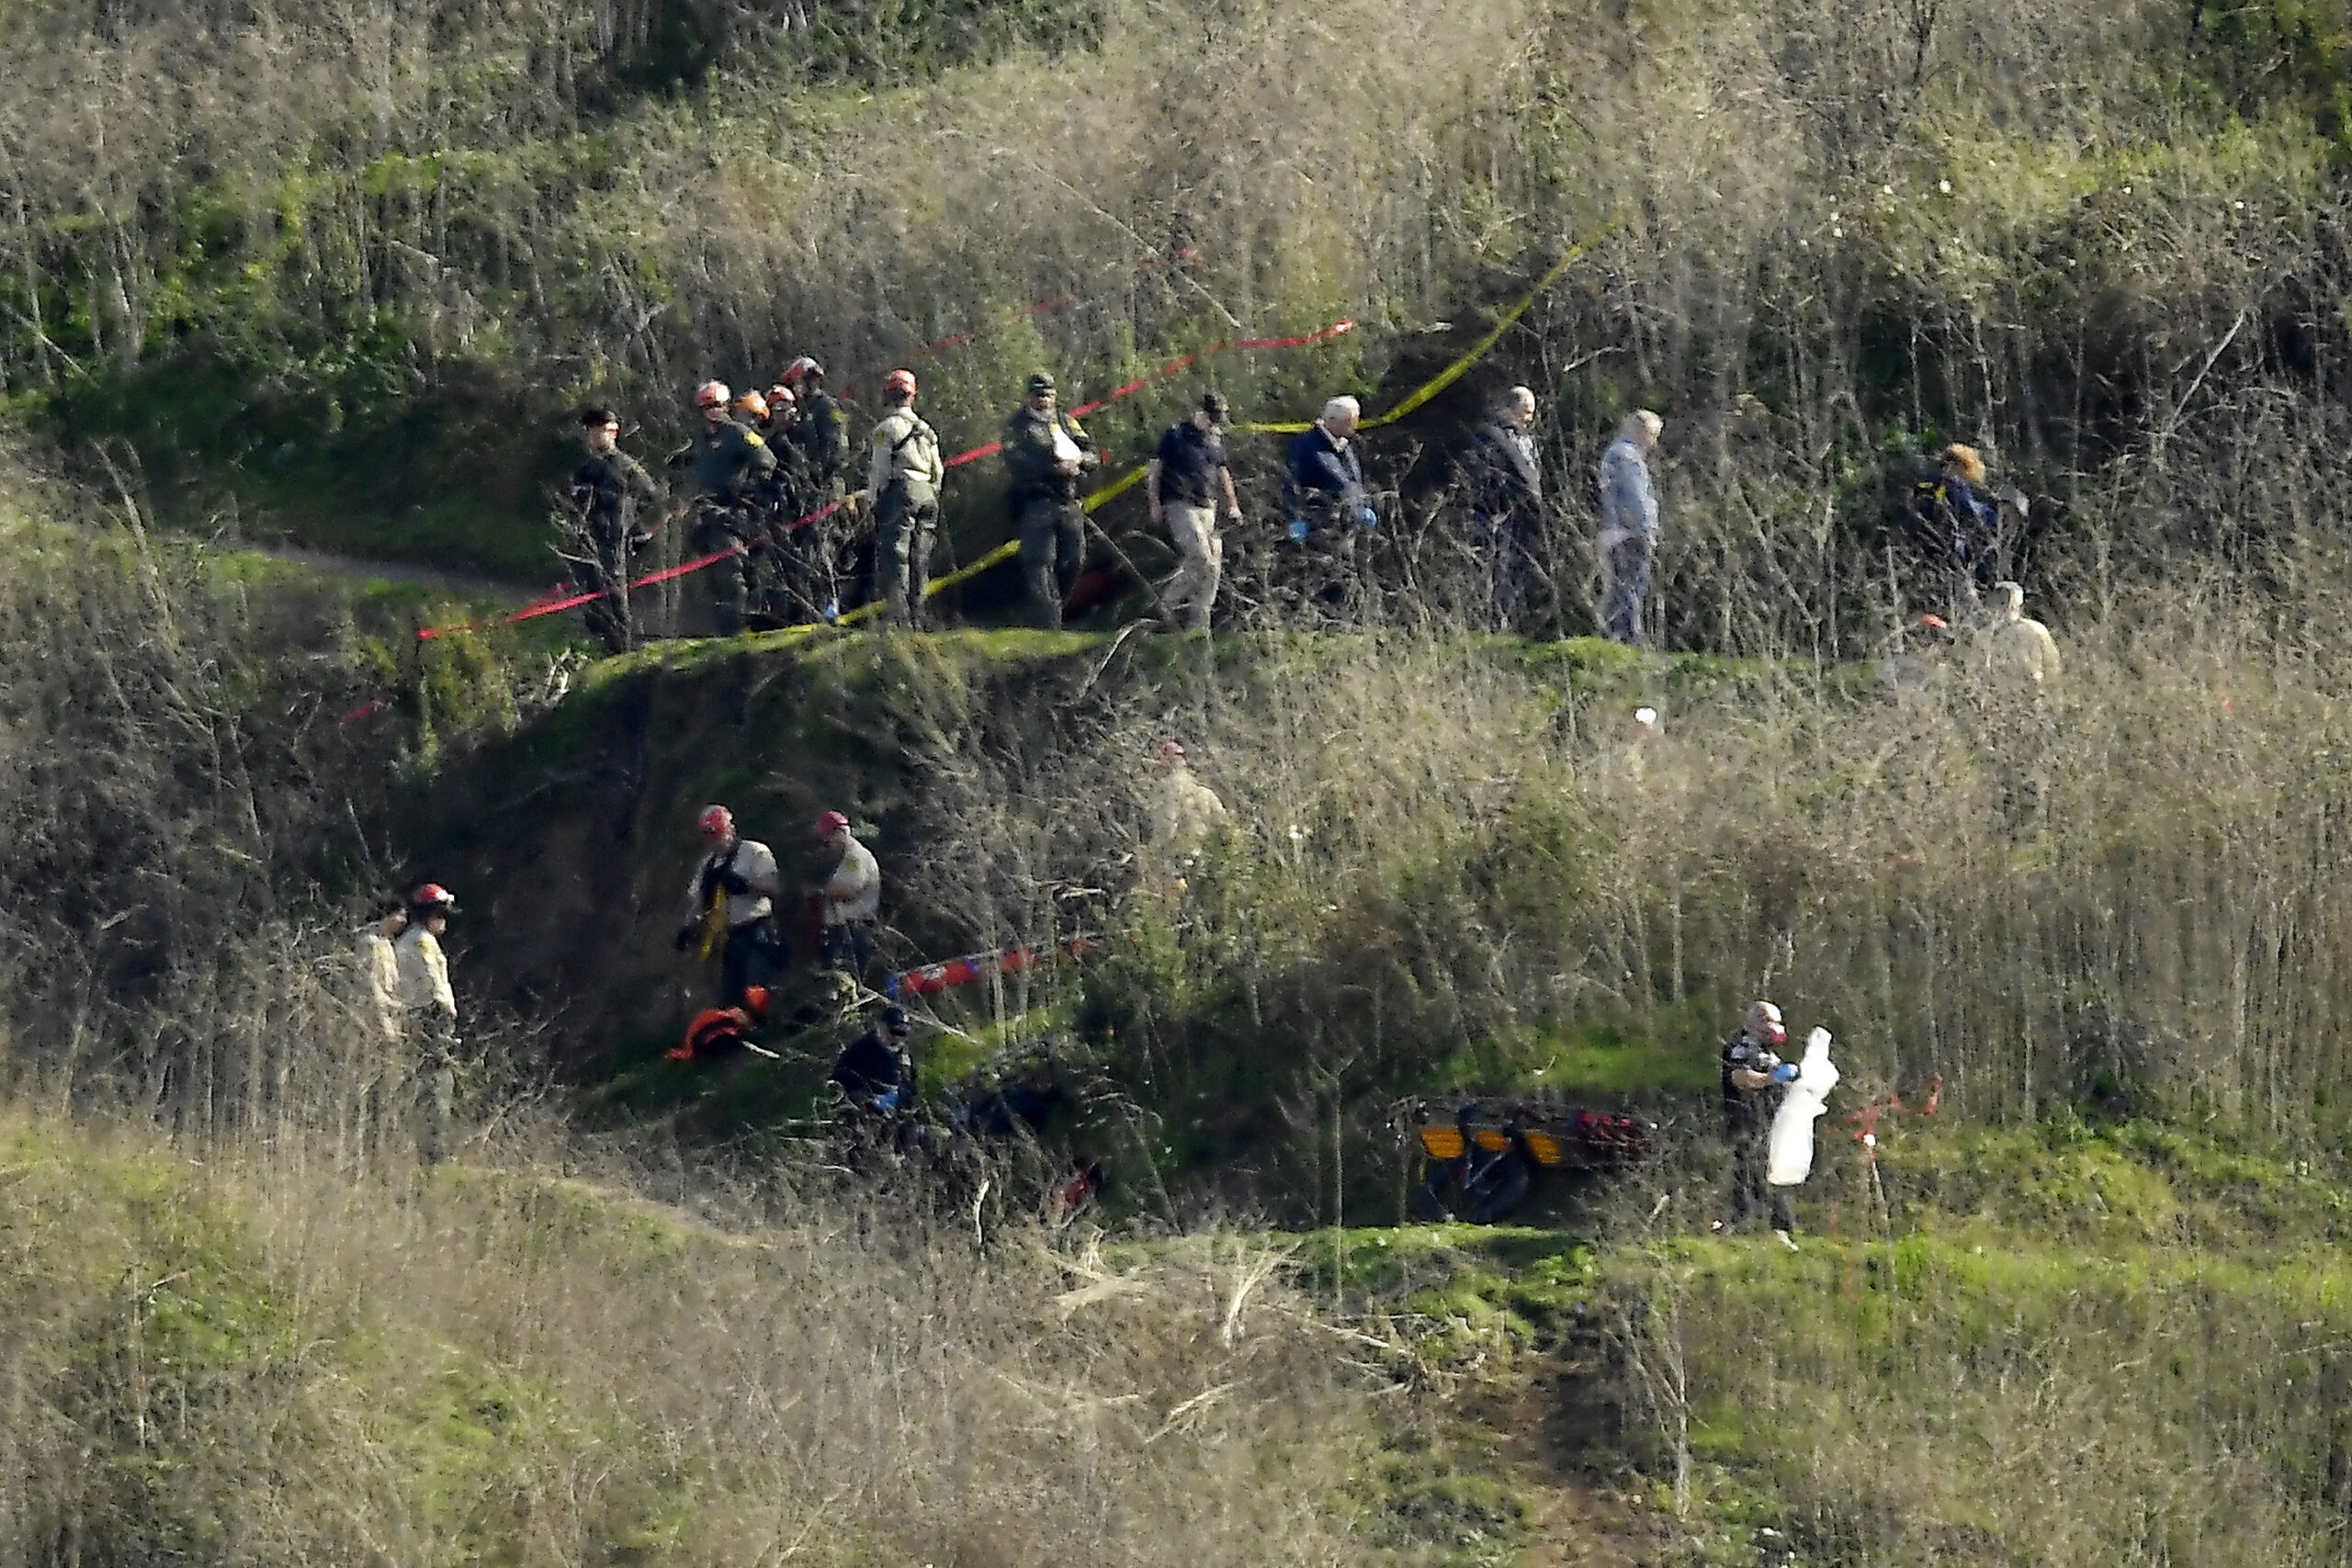 FILE - Investigators work the scene of a helicopter crash that killed former NBA basketball player Kobe Bryant and his teenage daughter, in Calabasas, Calif., on Jan. 27, 2020. A federal judge ruled Monday, Nov. 1, 2021, that Bryant’s widow won't have to undergo psychiatric testing for her lawsuit over graphic photos of the 2020 helicopter crash that killed the basketball star, her 13-year-old daughter and others. (AP Photo/Mark J. Terrill, File)